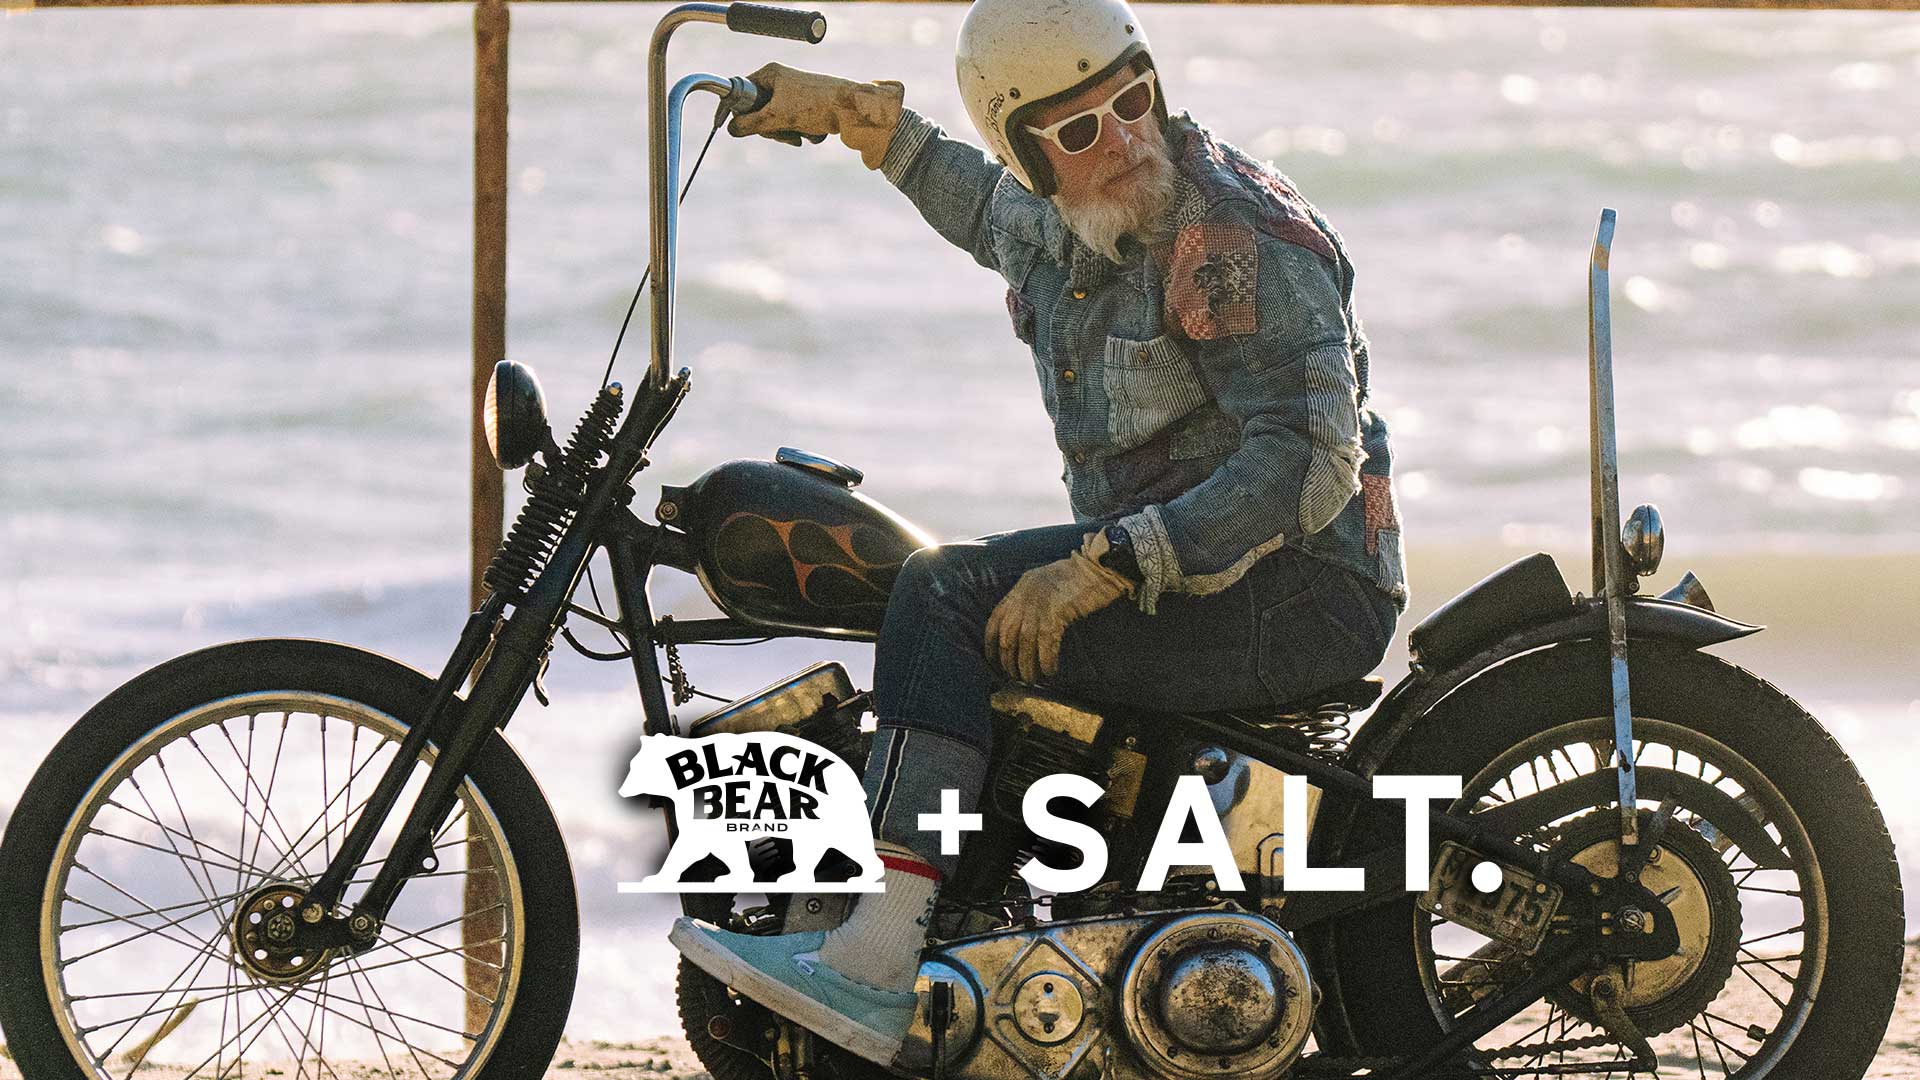 Black Bear and SALT. Collaboration header with a man on a motorcycle on the beach in sunglasses